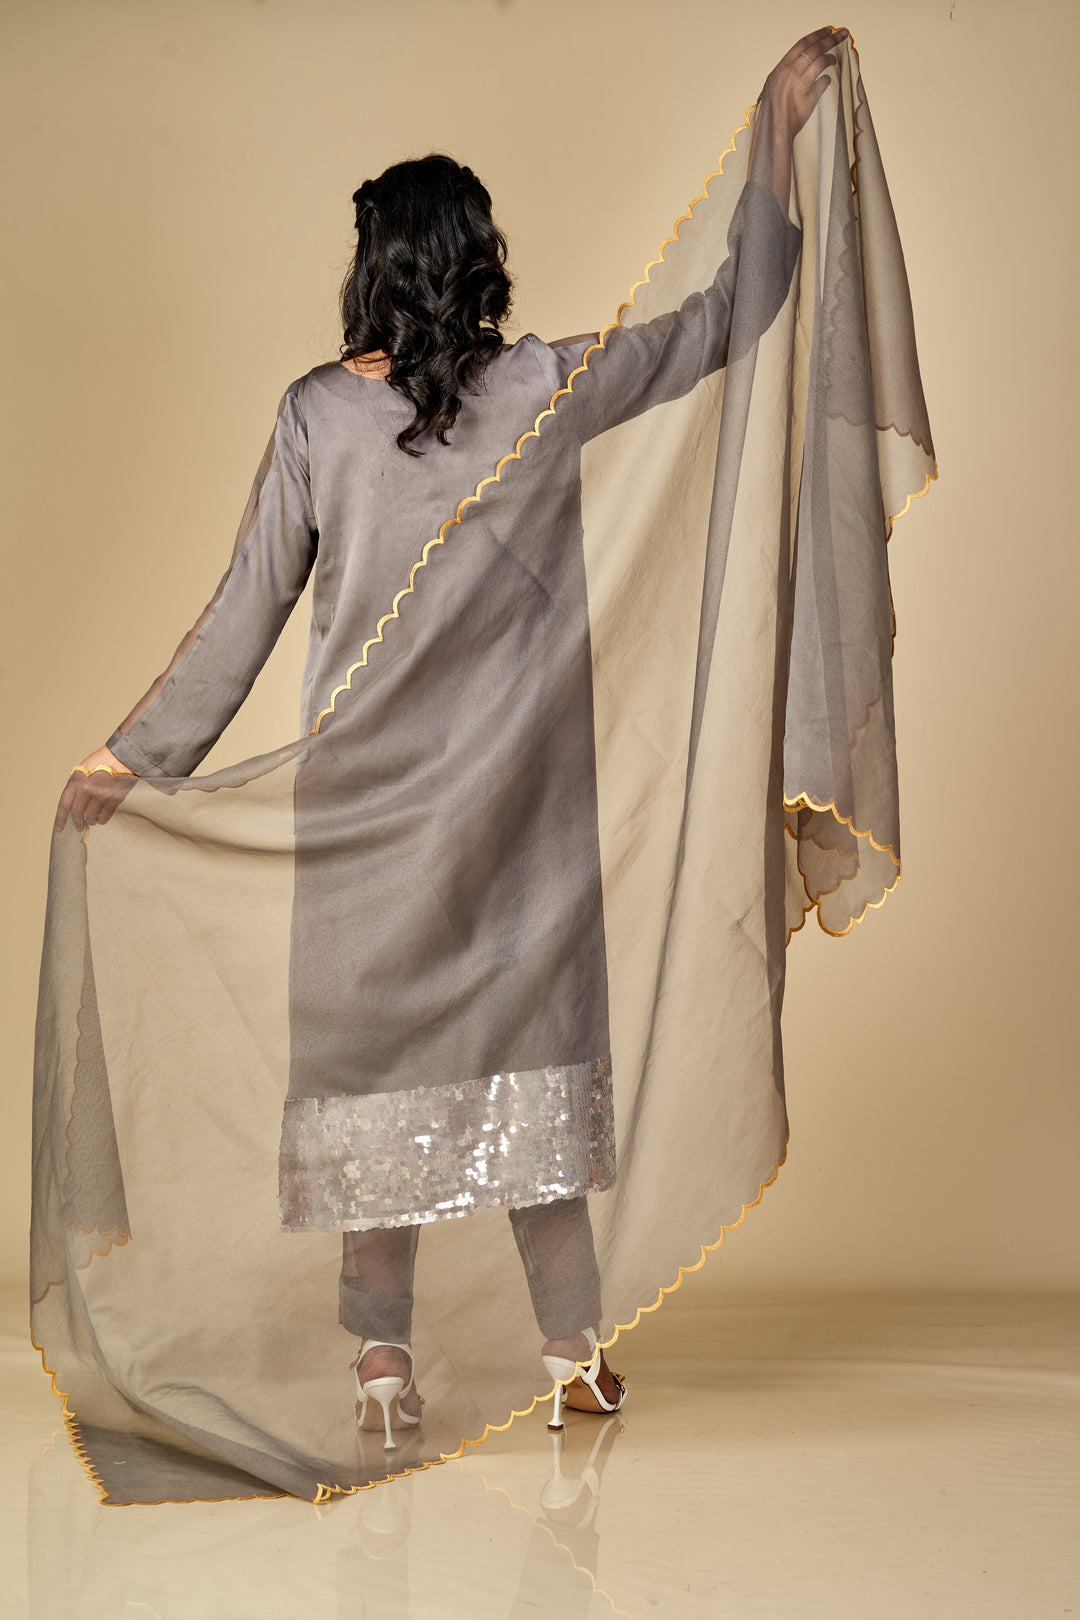 EMBROIDERED DUPATTA  S24-DP37